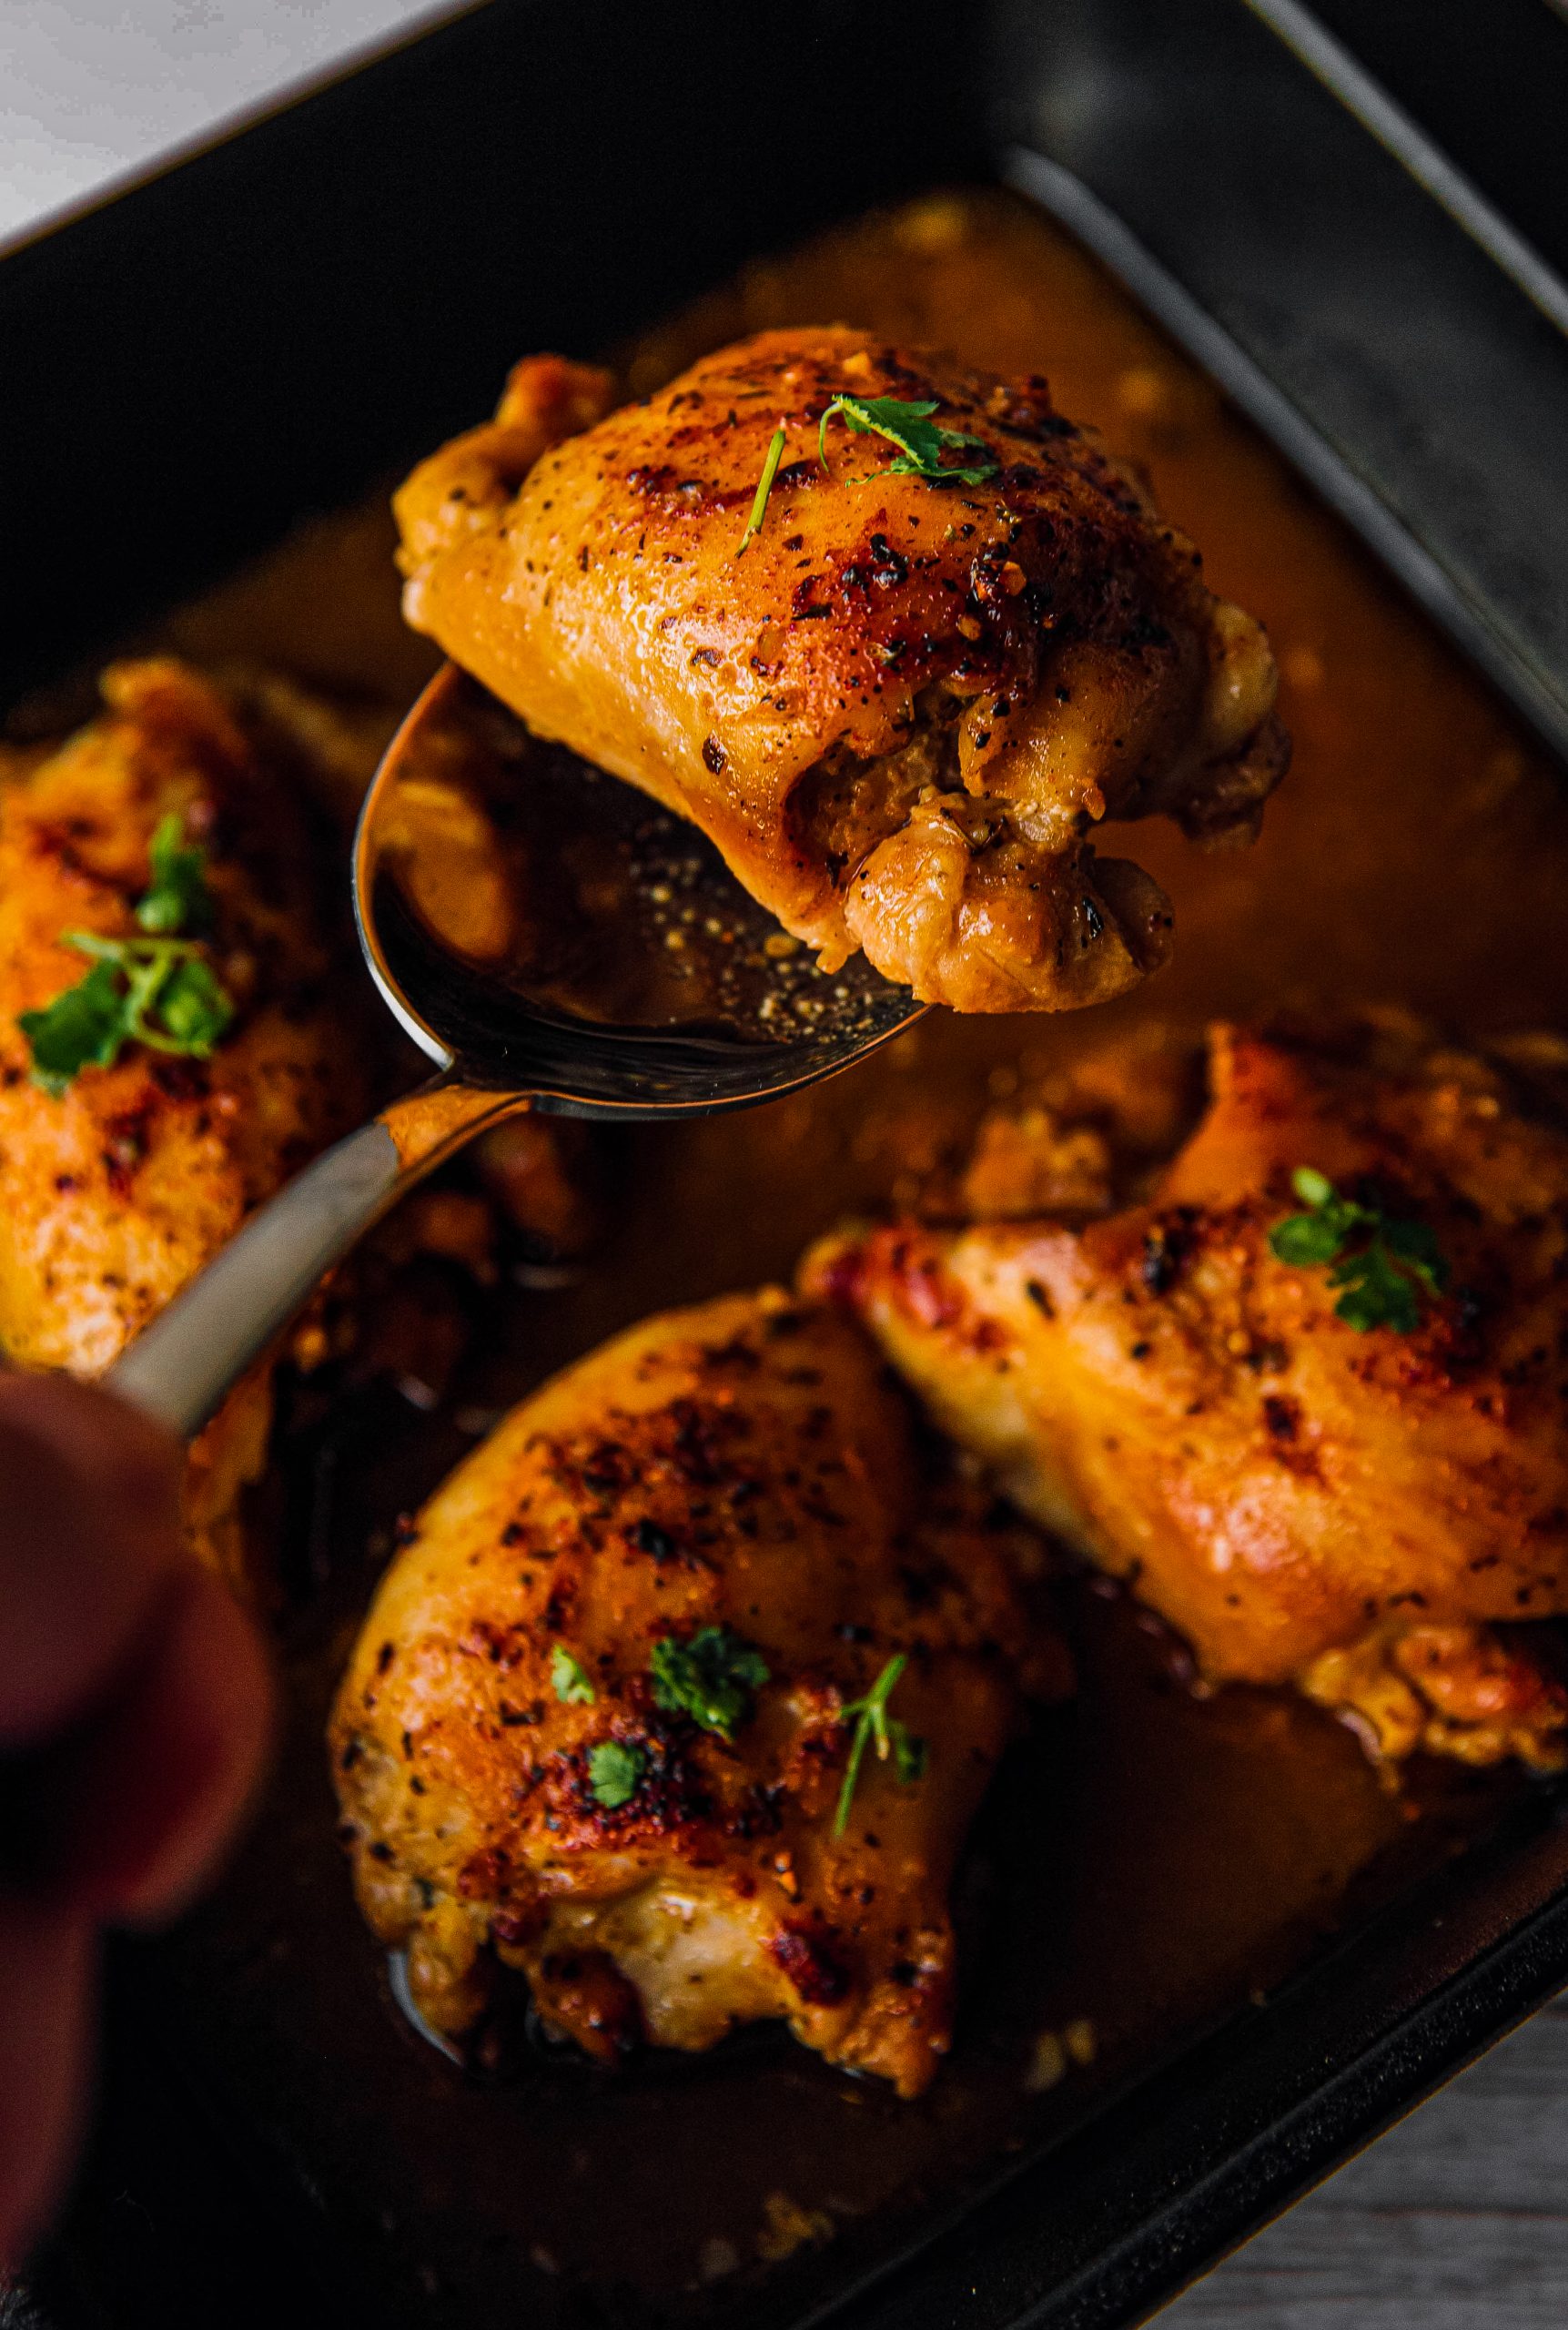 When the sauce is ready, cover each of the chicken thighs and serve them in the dish of your choice. Serve the remaining sauce as you wish.